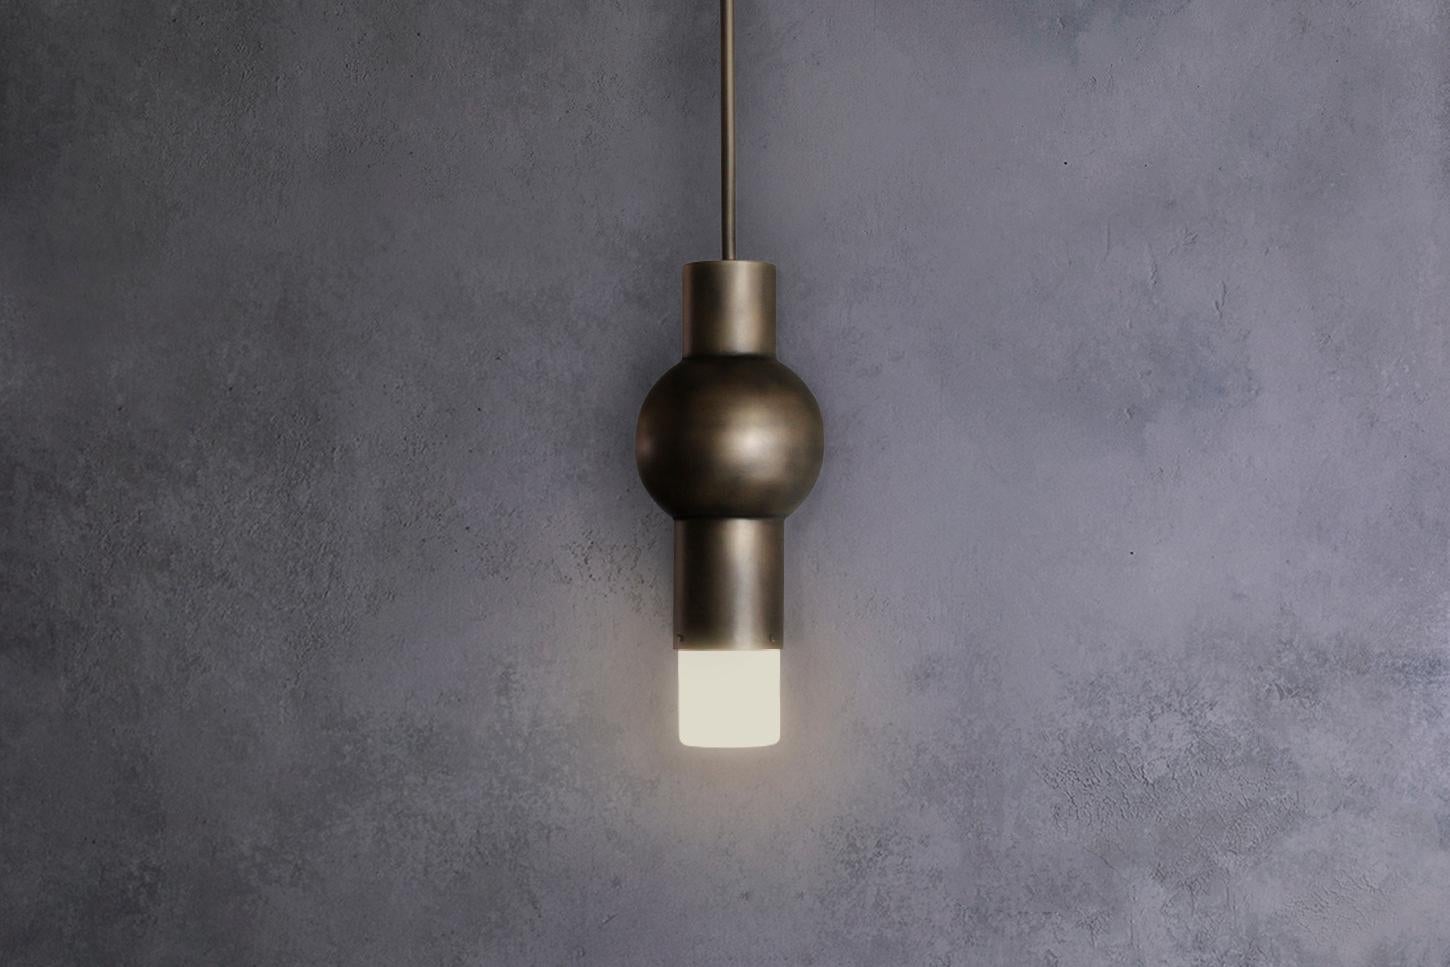 The Lantern pendant presents a finely balanced form with a hand-finished antique brass patina accompanied by a frosted glass diffuser. The Lantern Pendant provides a warm glow and a unique moment of interest wherever it is placed.

Materials: